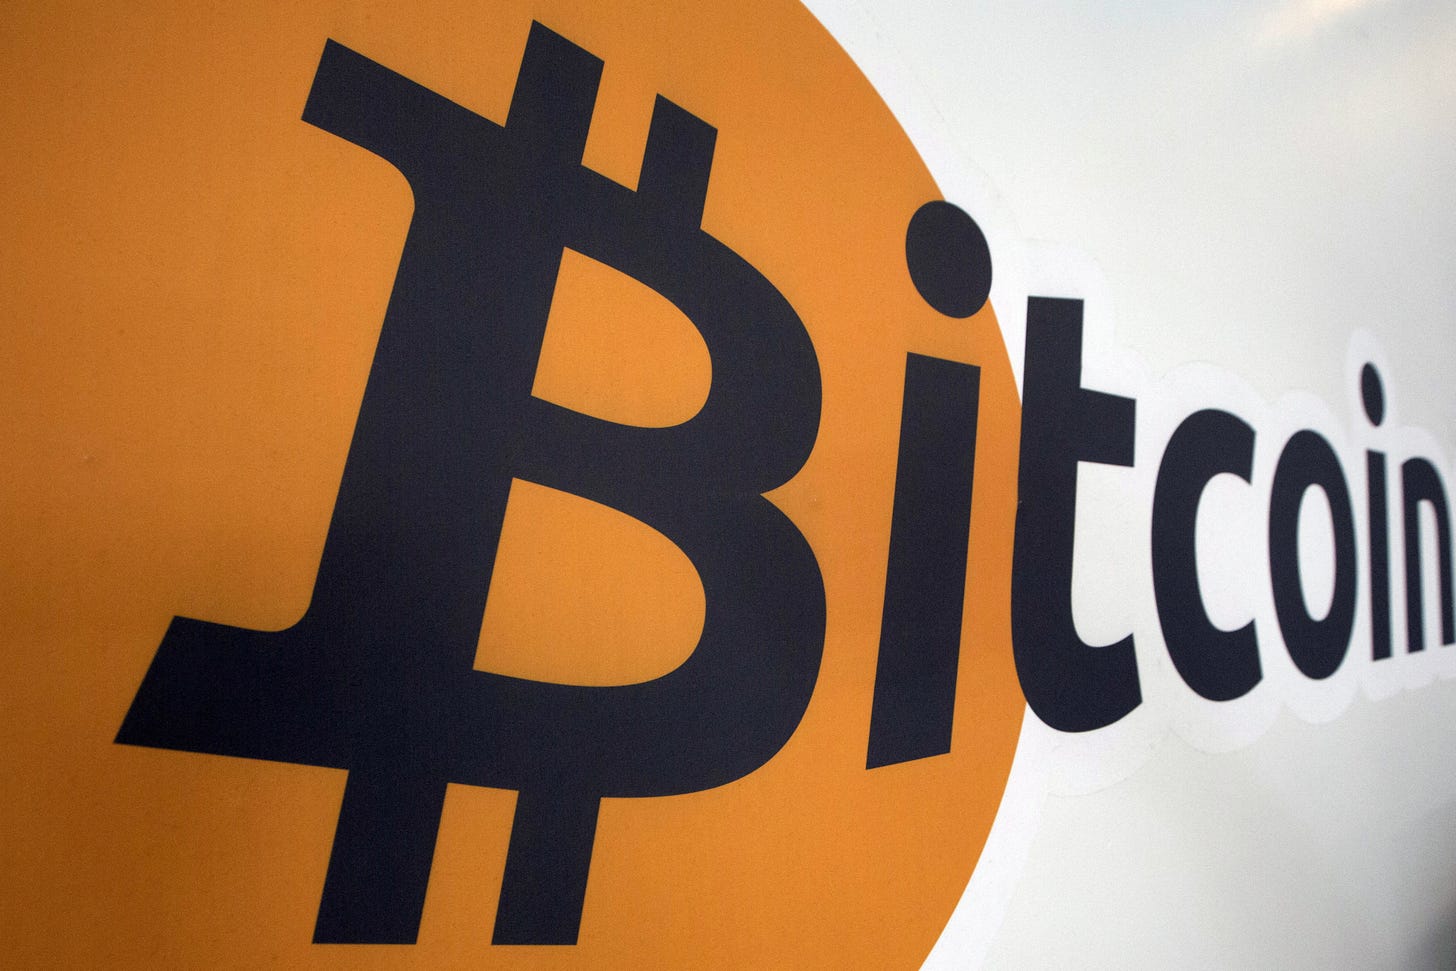 A Bitcoin logo is displayed at the Bitcoin Center New York City in New York's financial district